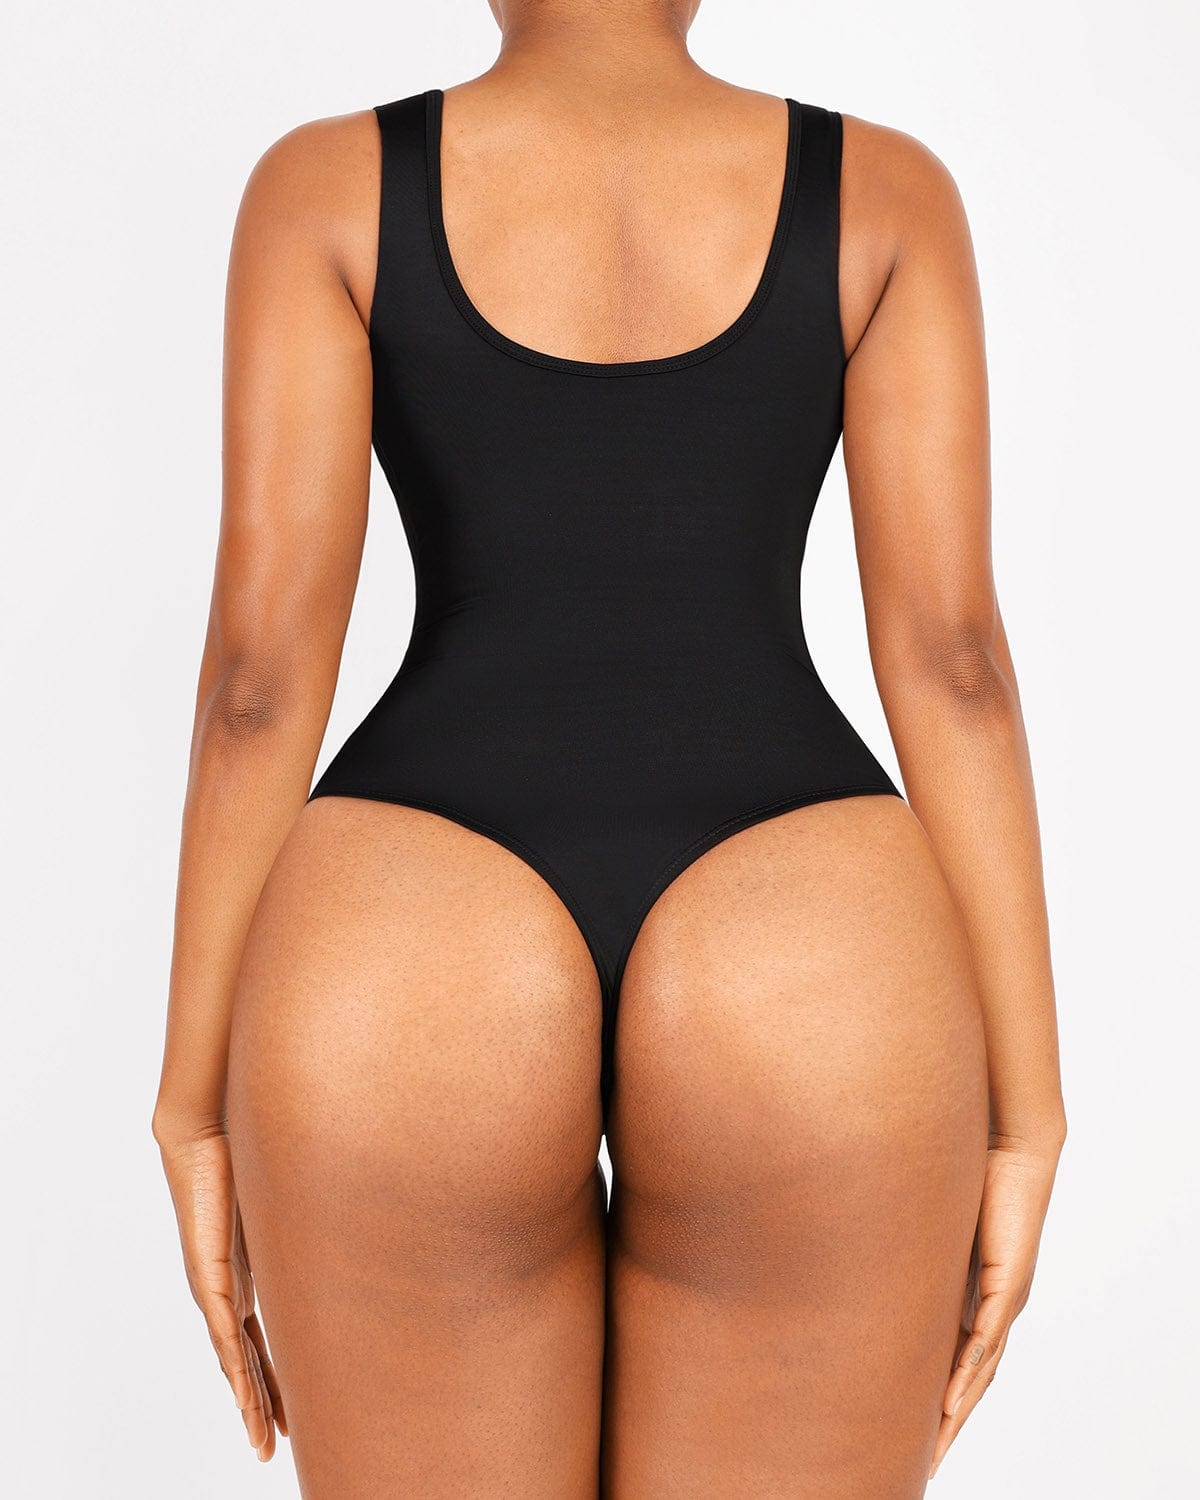 This @Shapellx swimsuit SNATCHES! It hugs in all the right places. T